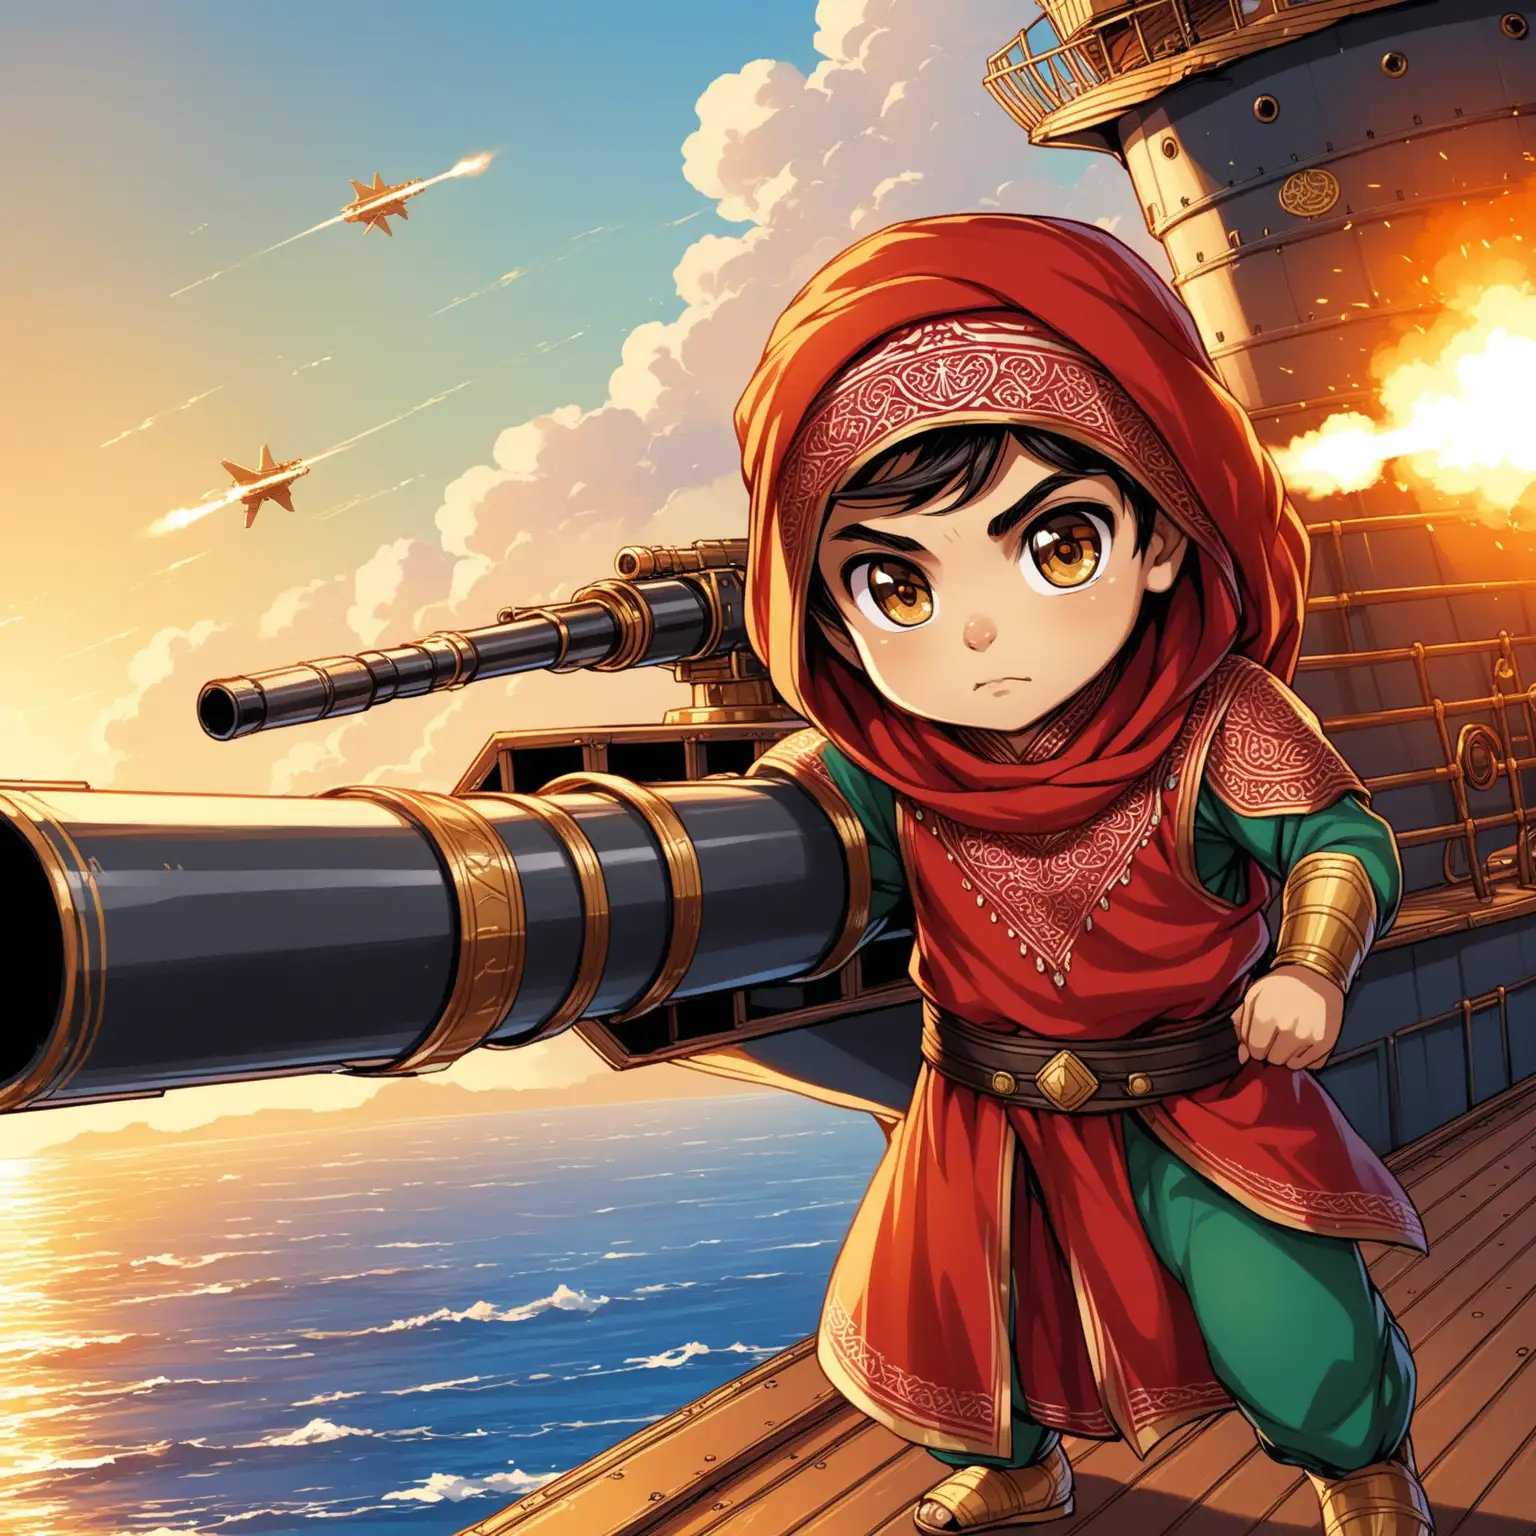 Defaults: Persian(face, language, design), 7 to 10 years old boys' favorite colors.

Ali is a Persian 10 years old warrior, on the IRIS Deylaman warship's deck, firing with anti-aircraft cannon, clothes full of Persian designs, smaller eyes, bigger nose, white skin, brown eyes.